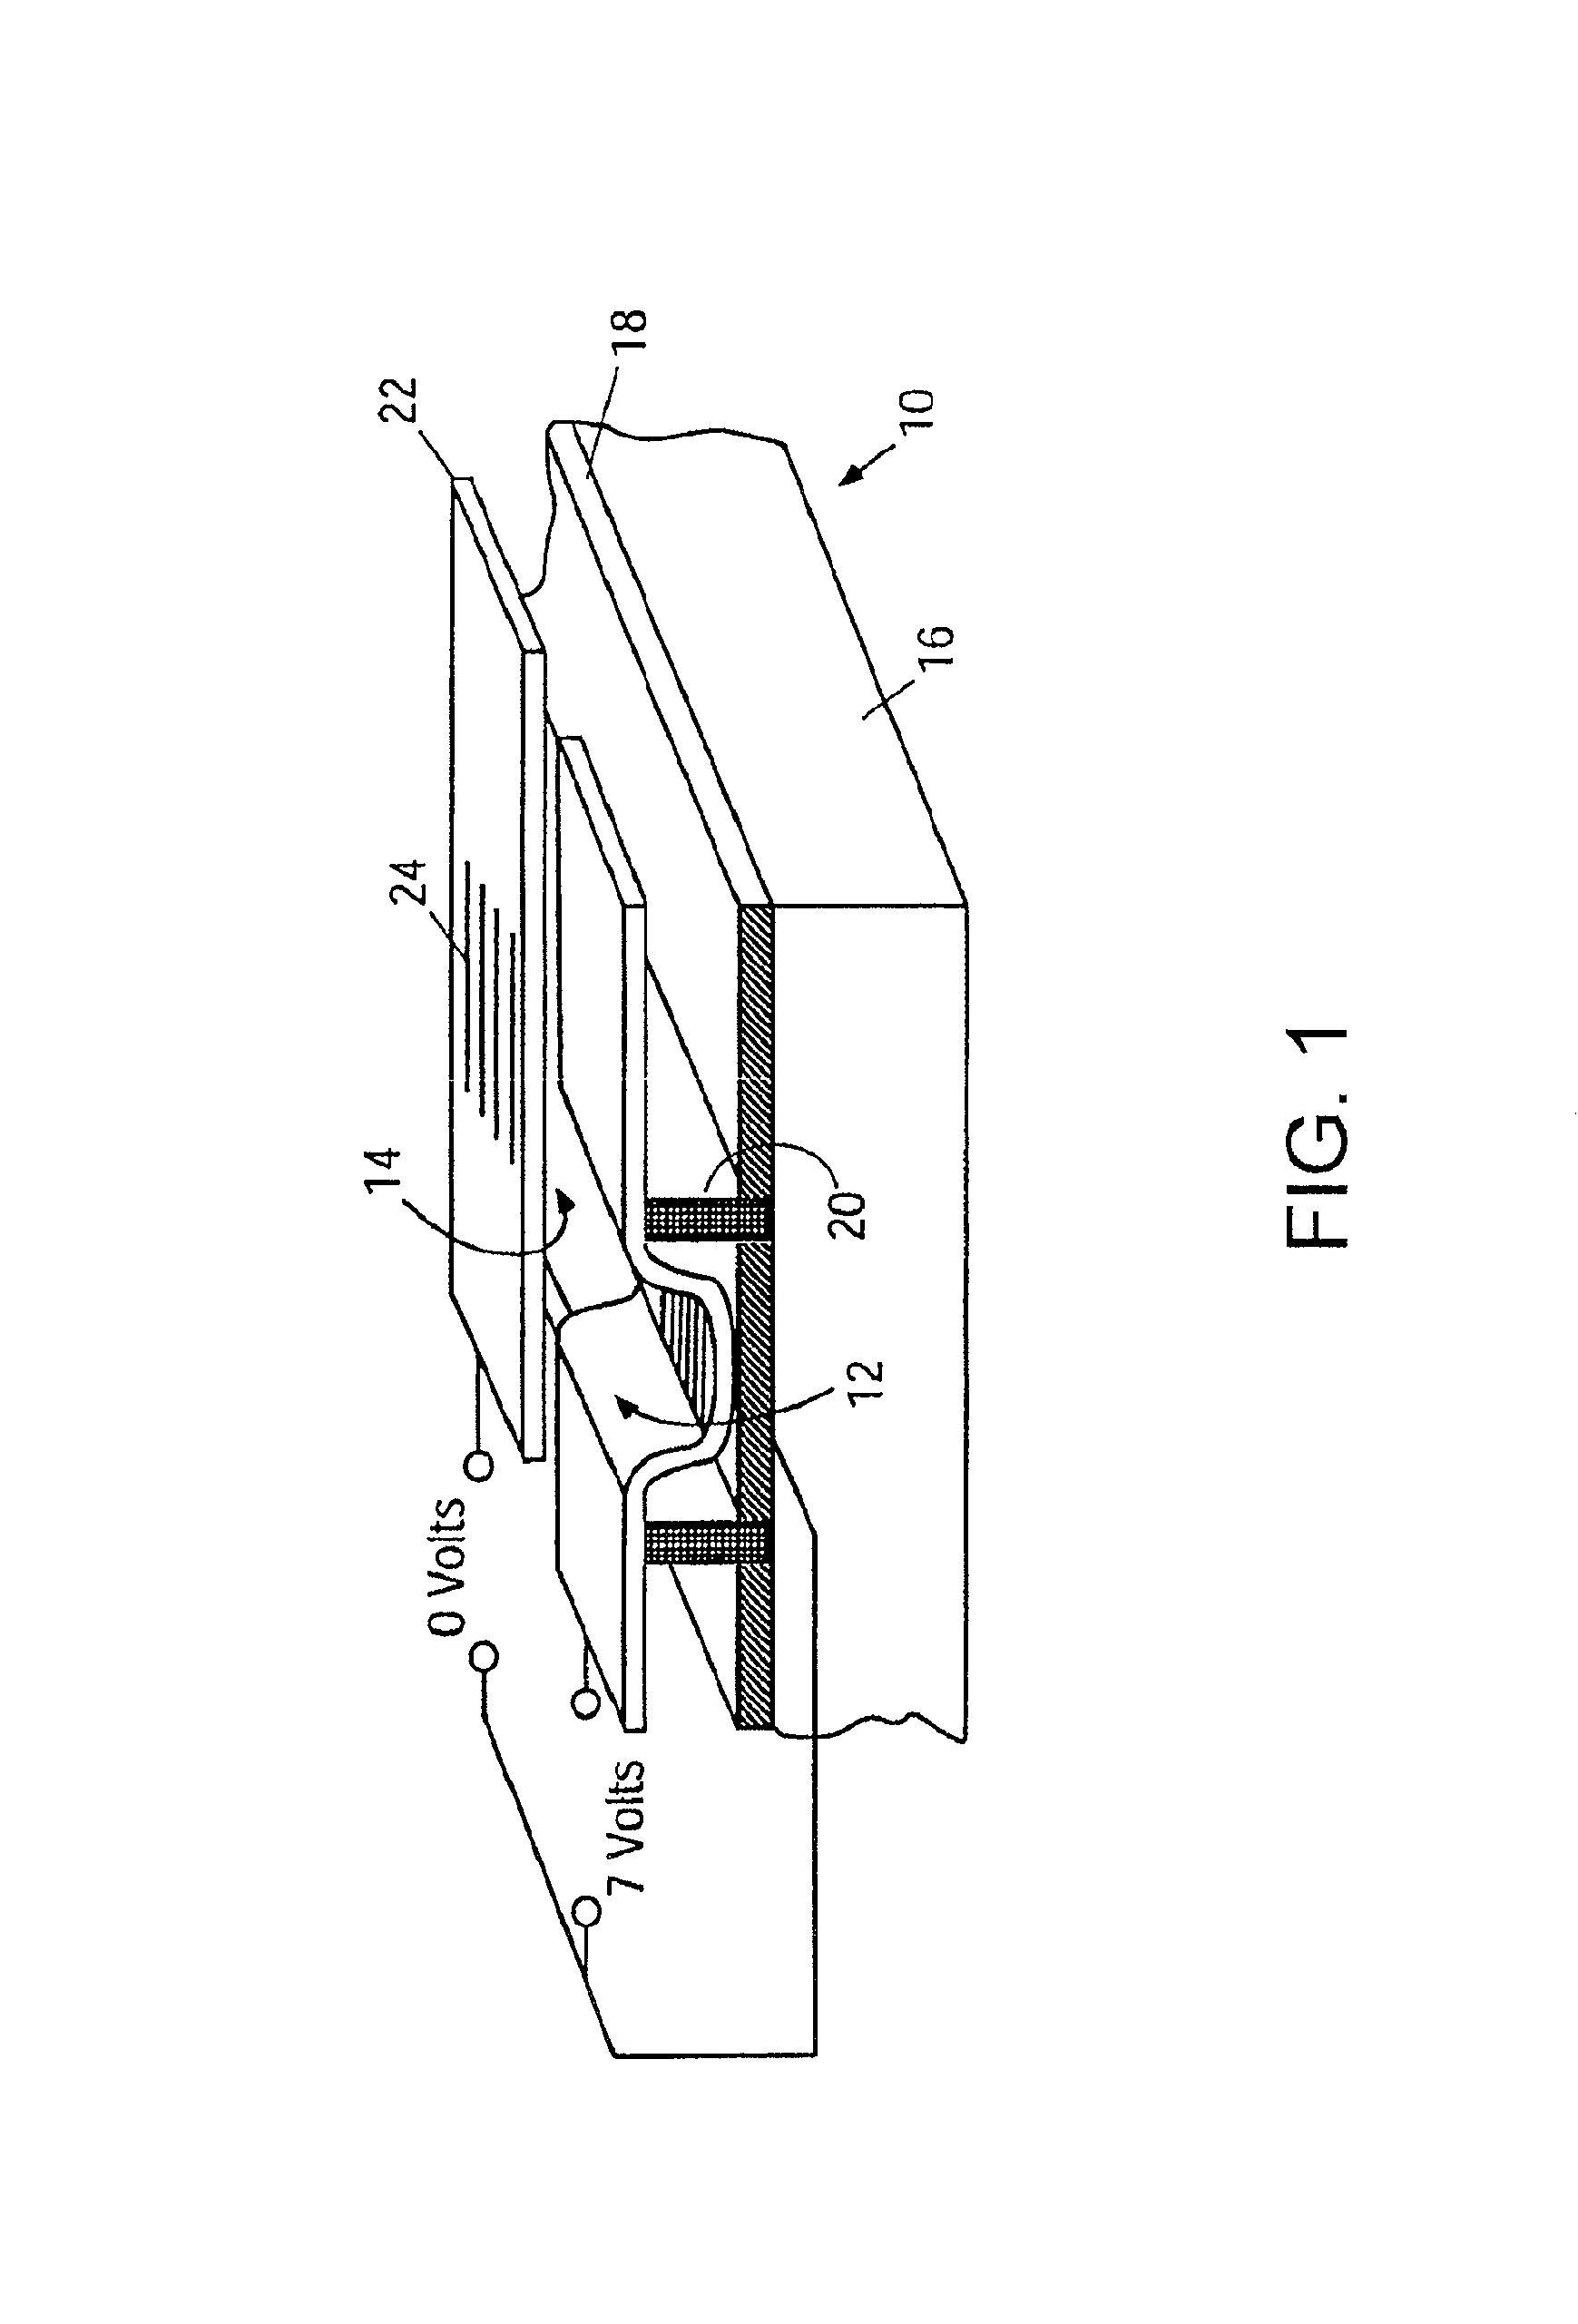 Method for fabricating a structure for a microelectromechanical system (MEMS) device